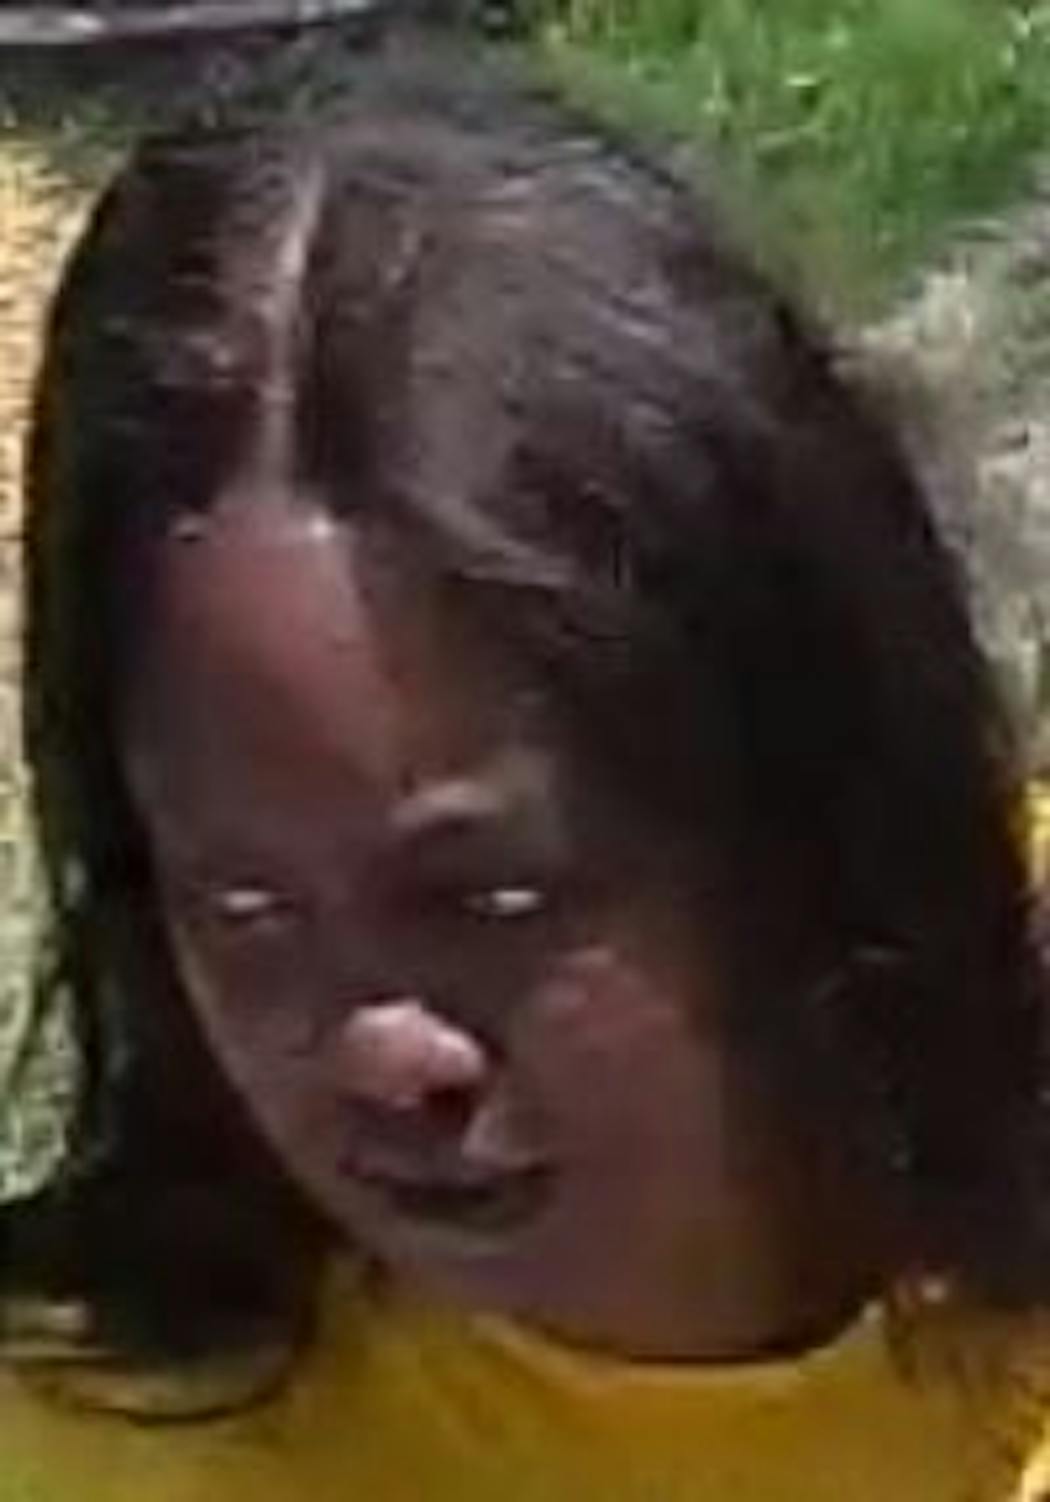 Police say this woman stole a dog off a residential porch in Maplewood on May 8.